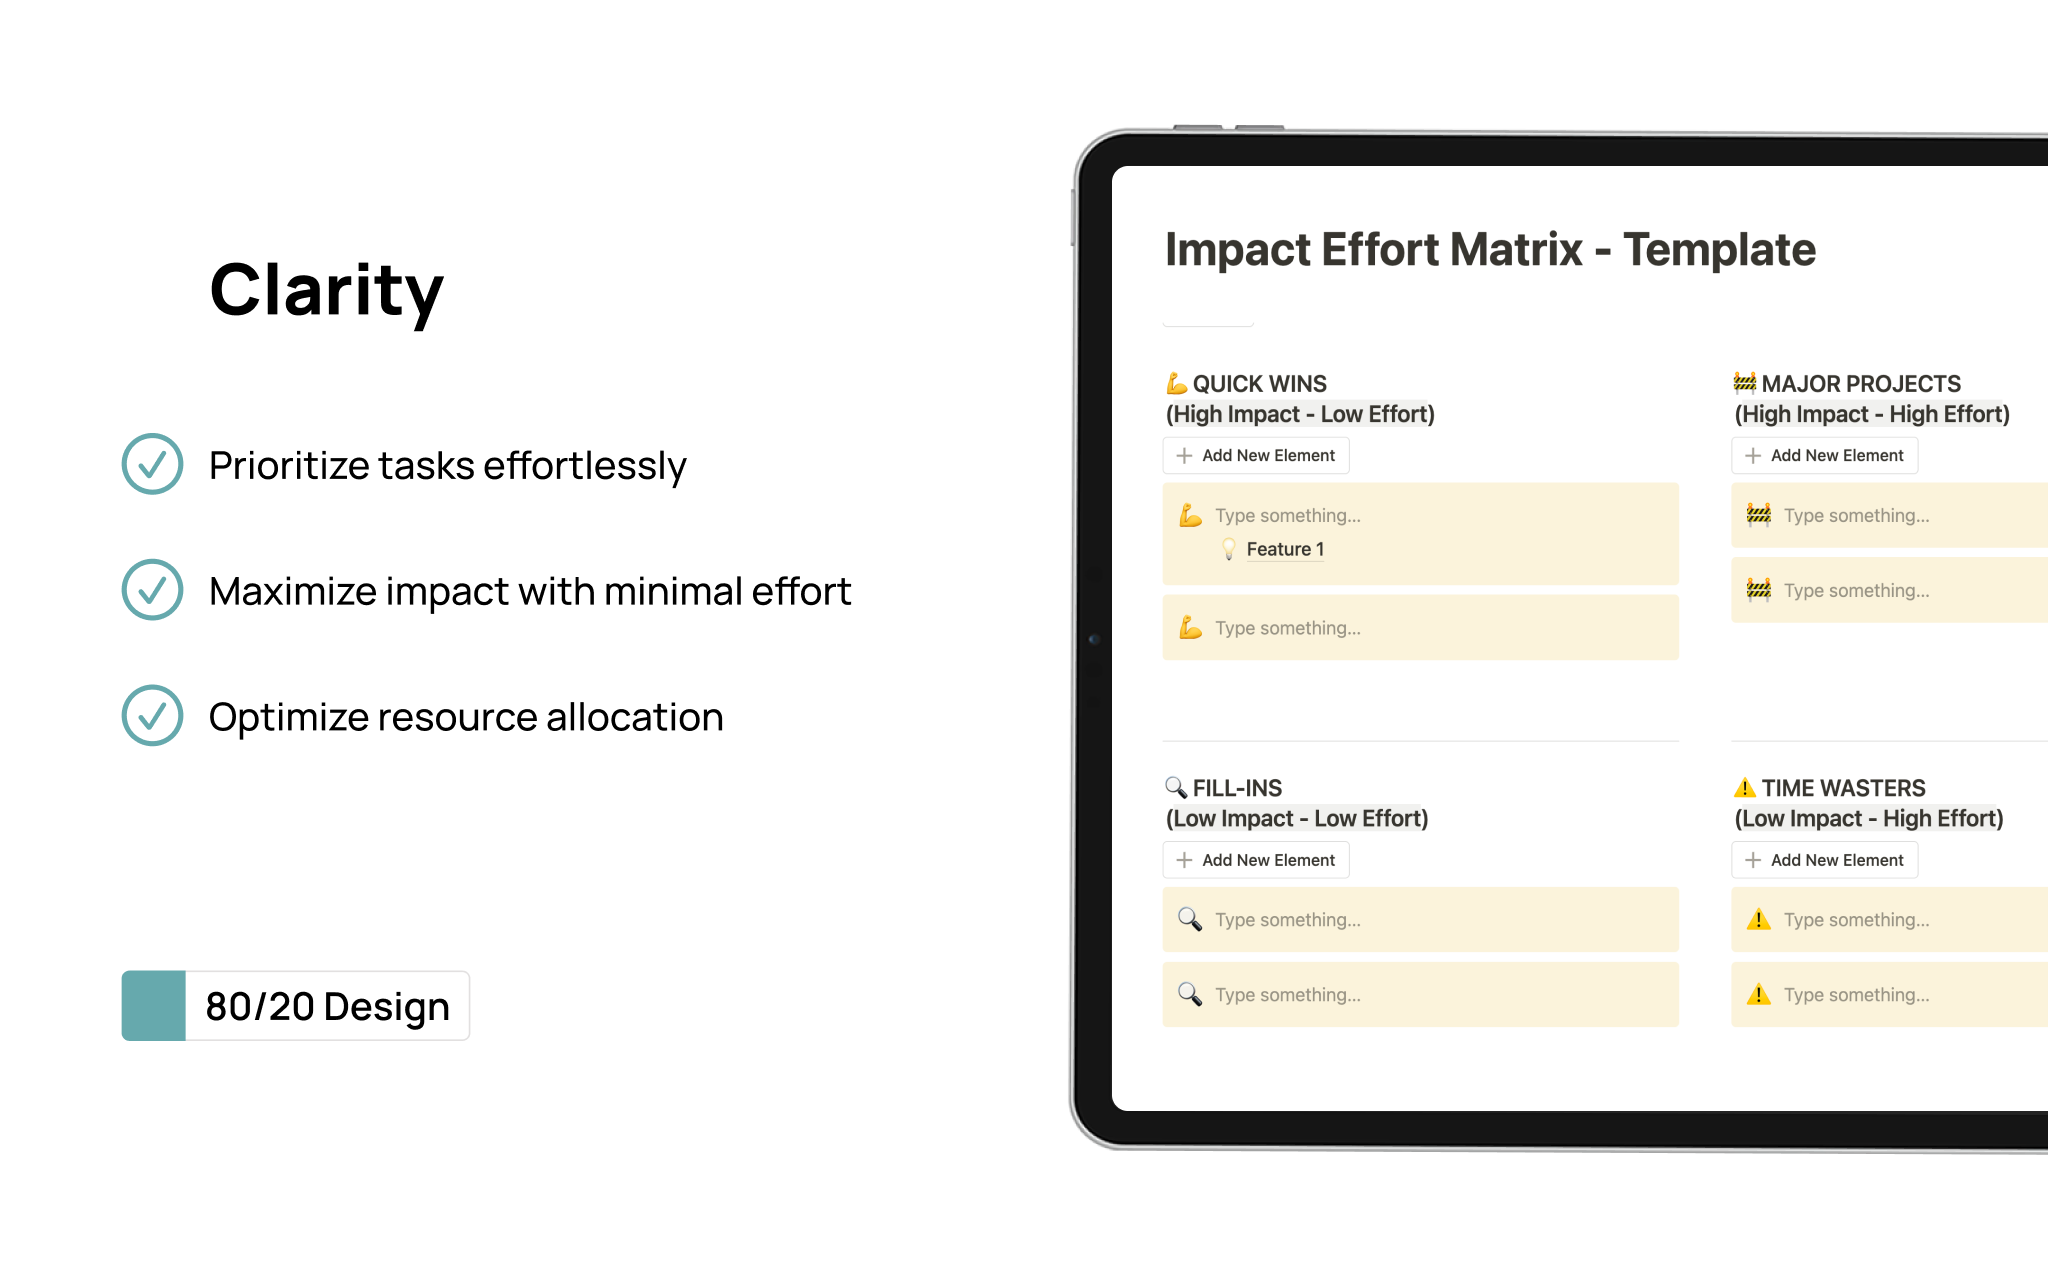 Simplify your decision-making with the free "🎯 Impact Effort Matrix" from 80/20 Design. Ideal for startups and solopreneurs, this tool is part of our "Product Manual" arsenal, designed to elevate your strategic planning 🚀.
Check out www.8020d.com for the full suite and support.